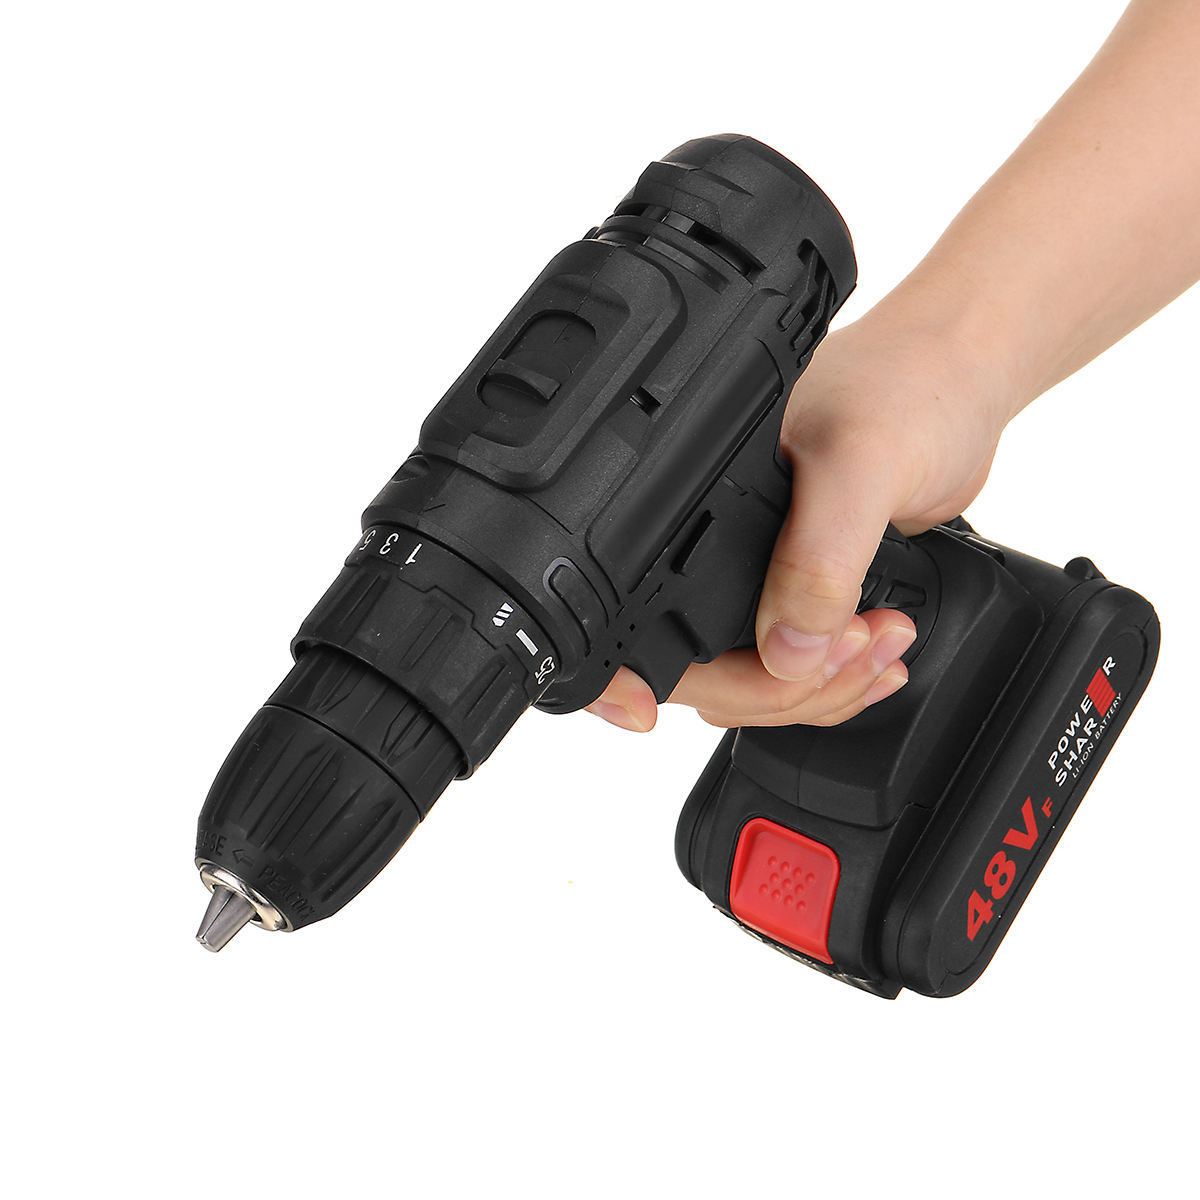 Cordless-Impact-Wrench-Drill-Socket-25-Speeds-LED-Electric-Screwdrive-w-12-Batteries-1712153-8